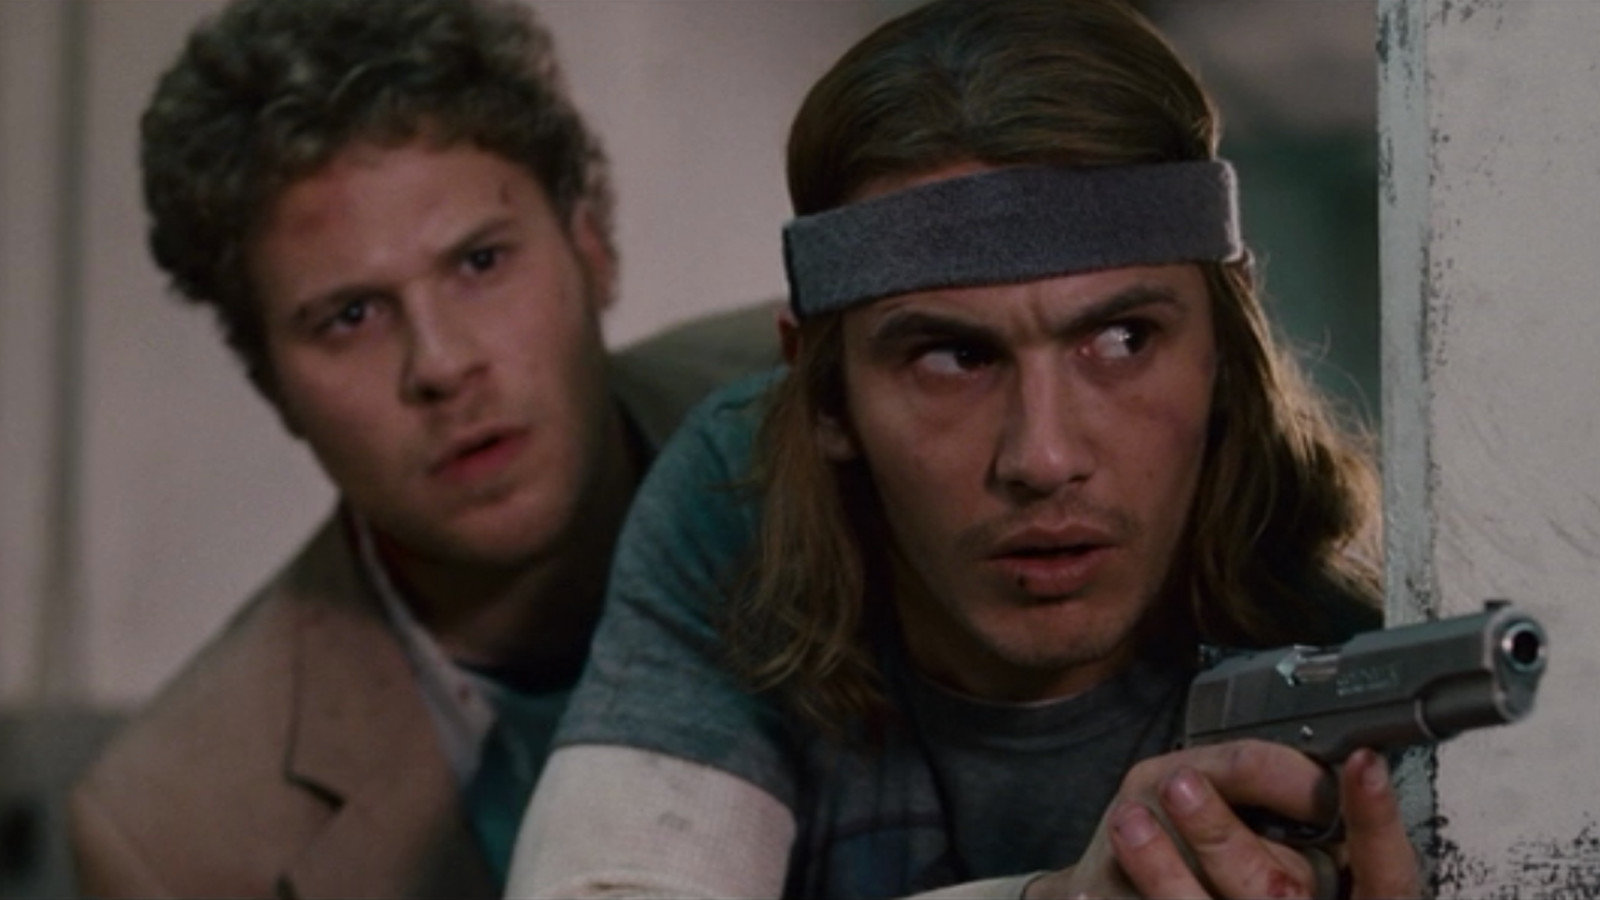 Pineapple Express Wallpapers